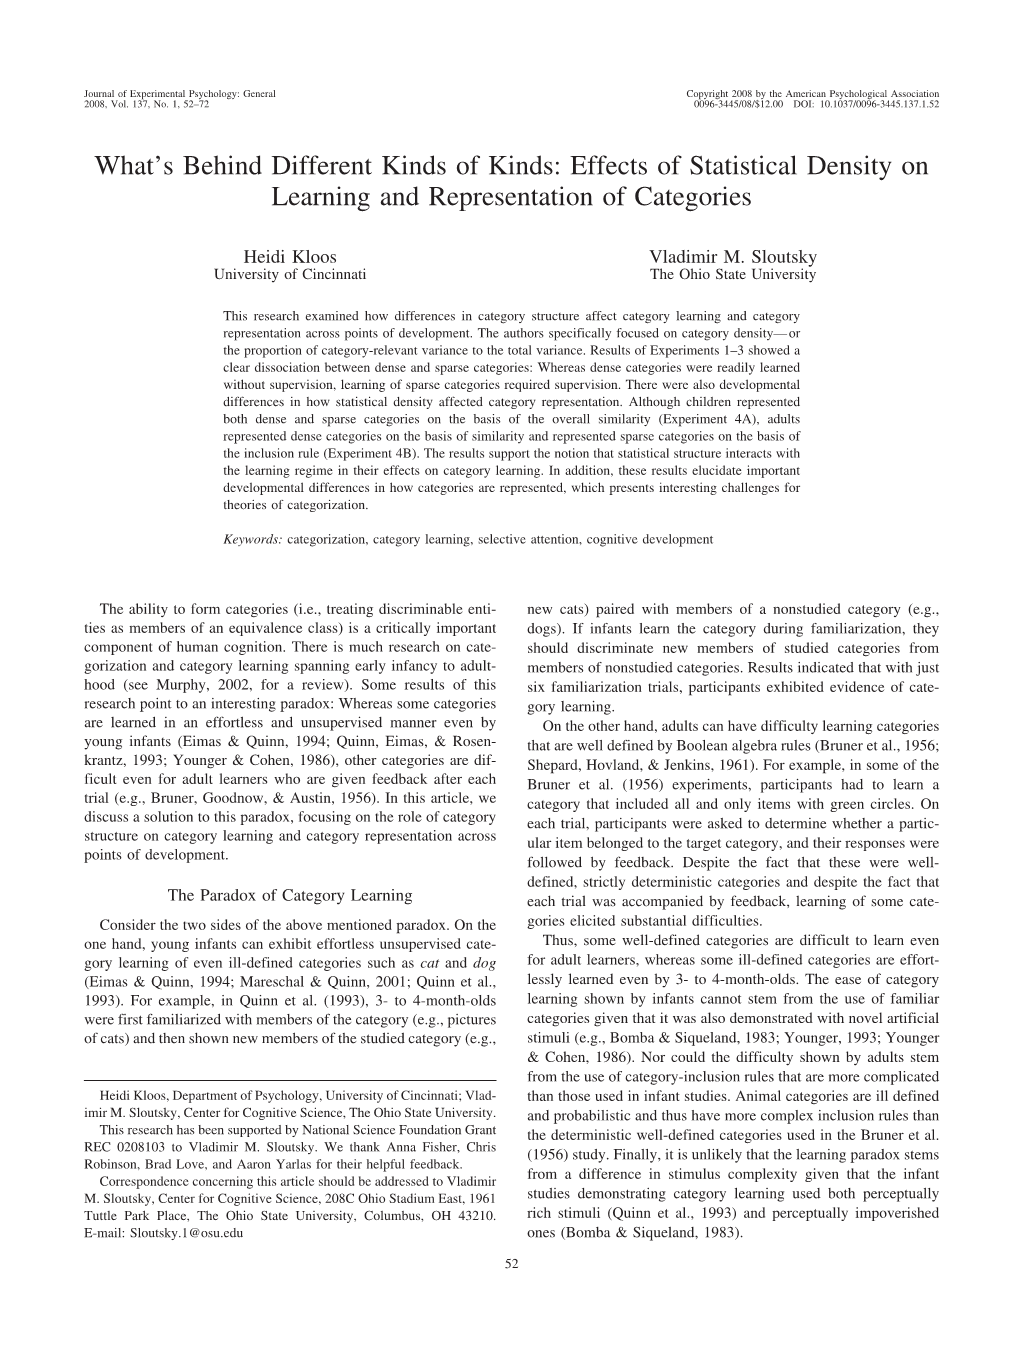 Effects of Statistical Density on Learning and Representation of Categories